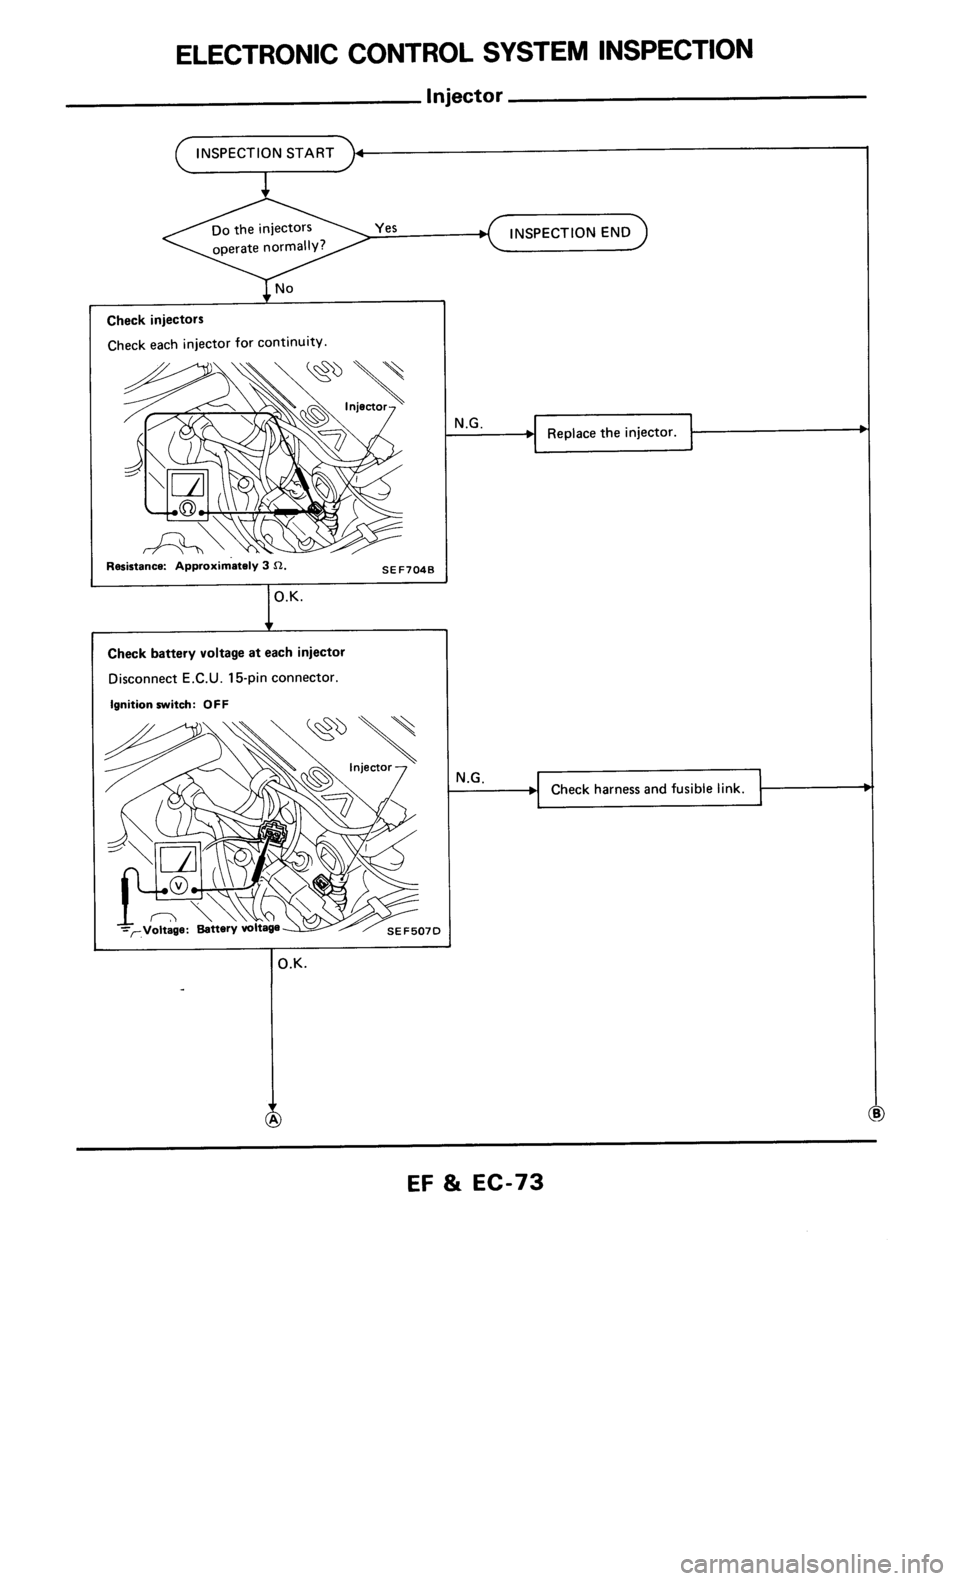 NISSAN 300ZX 1985 Z31 Engine Fuel And Emission Control System Manual PDF 